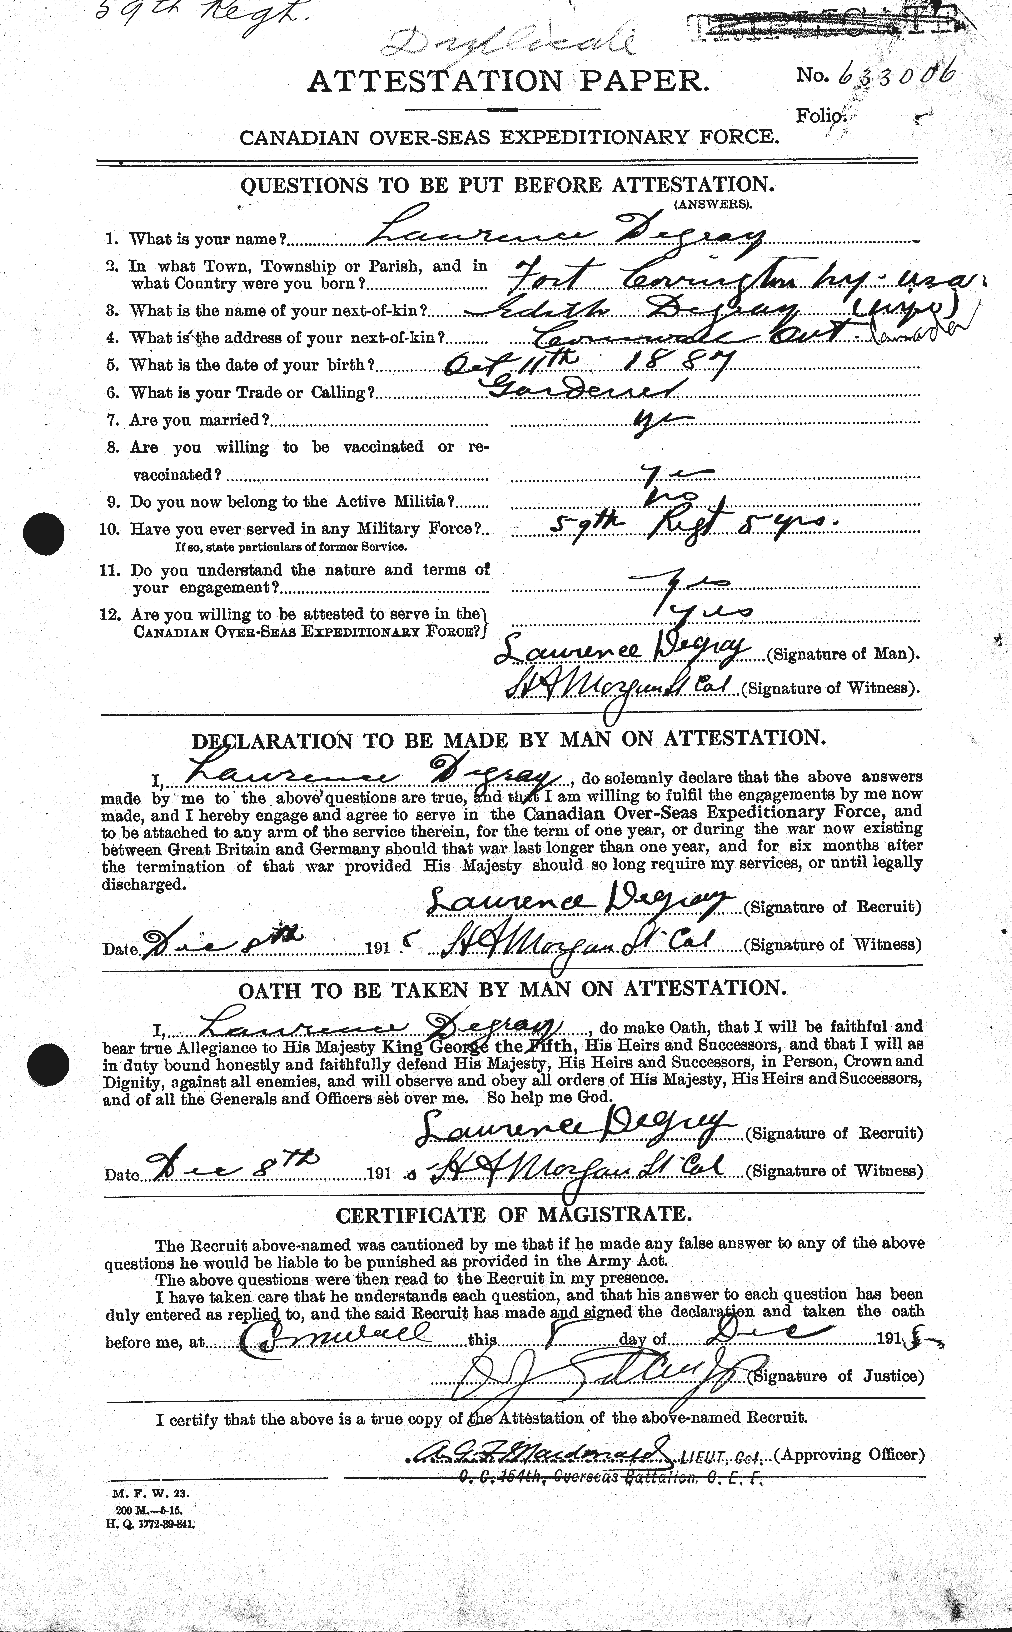 Personnel Records of the First World War - CEF 288210a